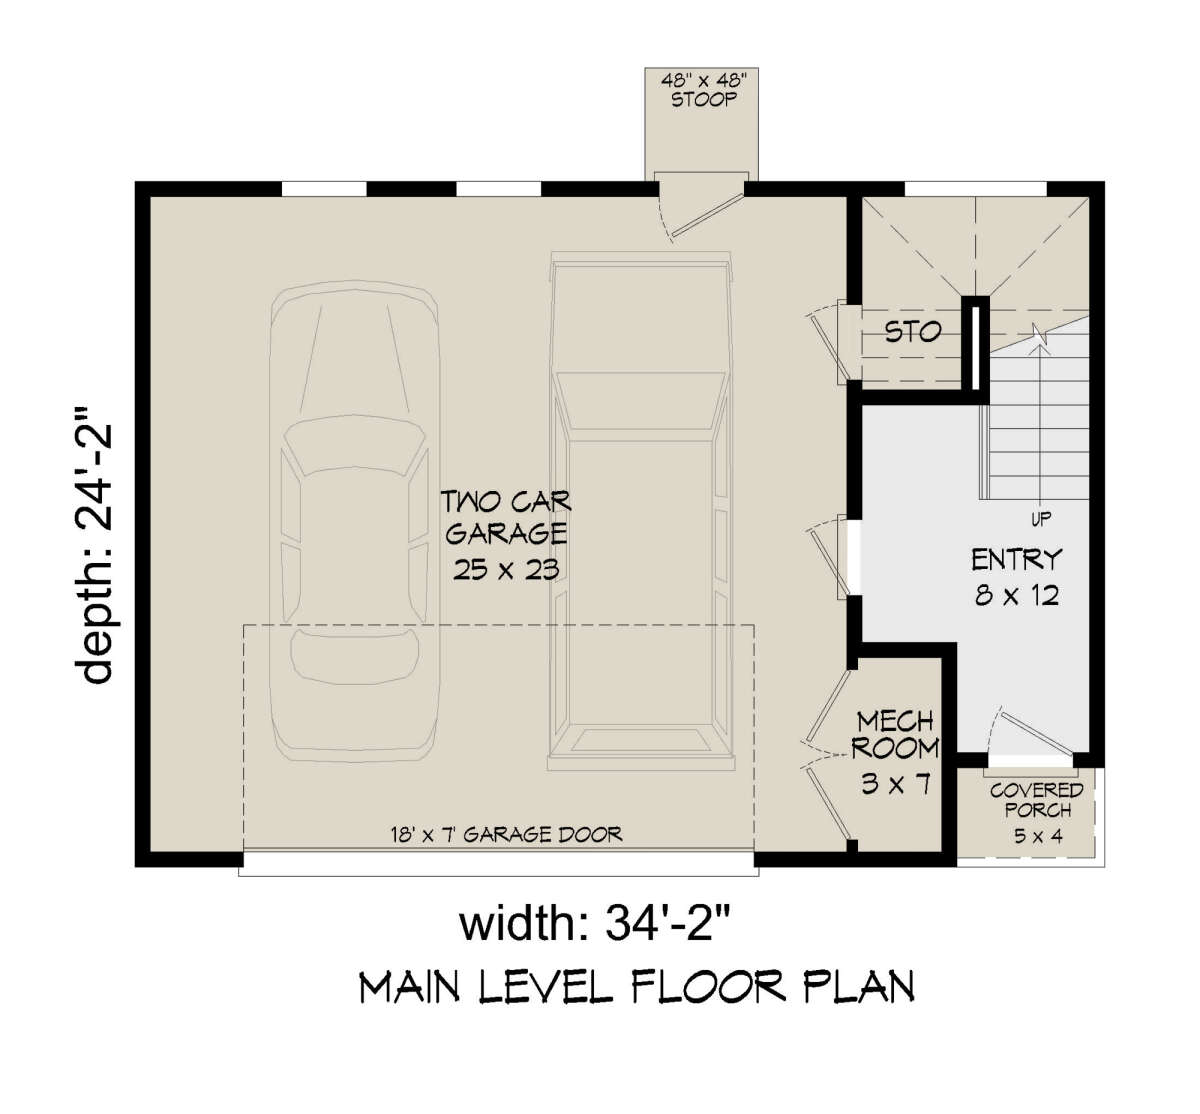 First Floor for House Plan #940-00589